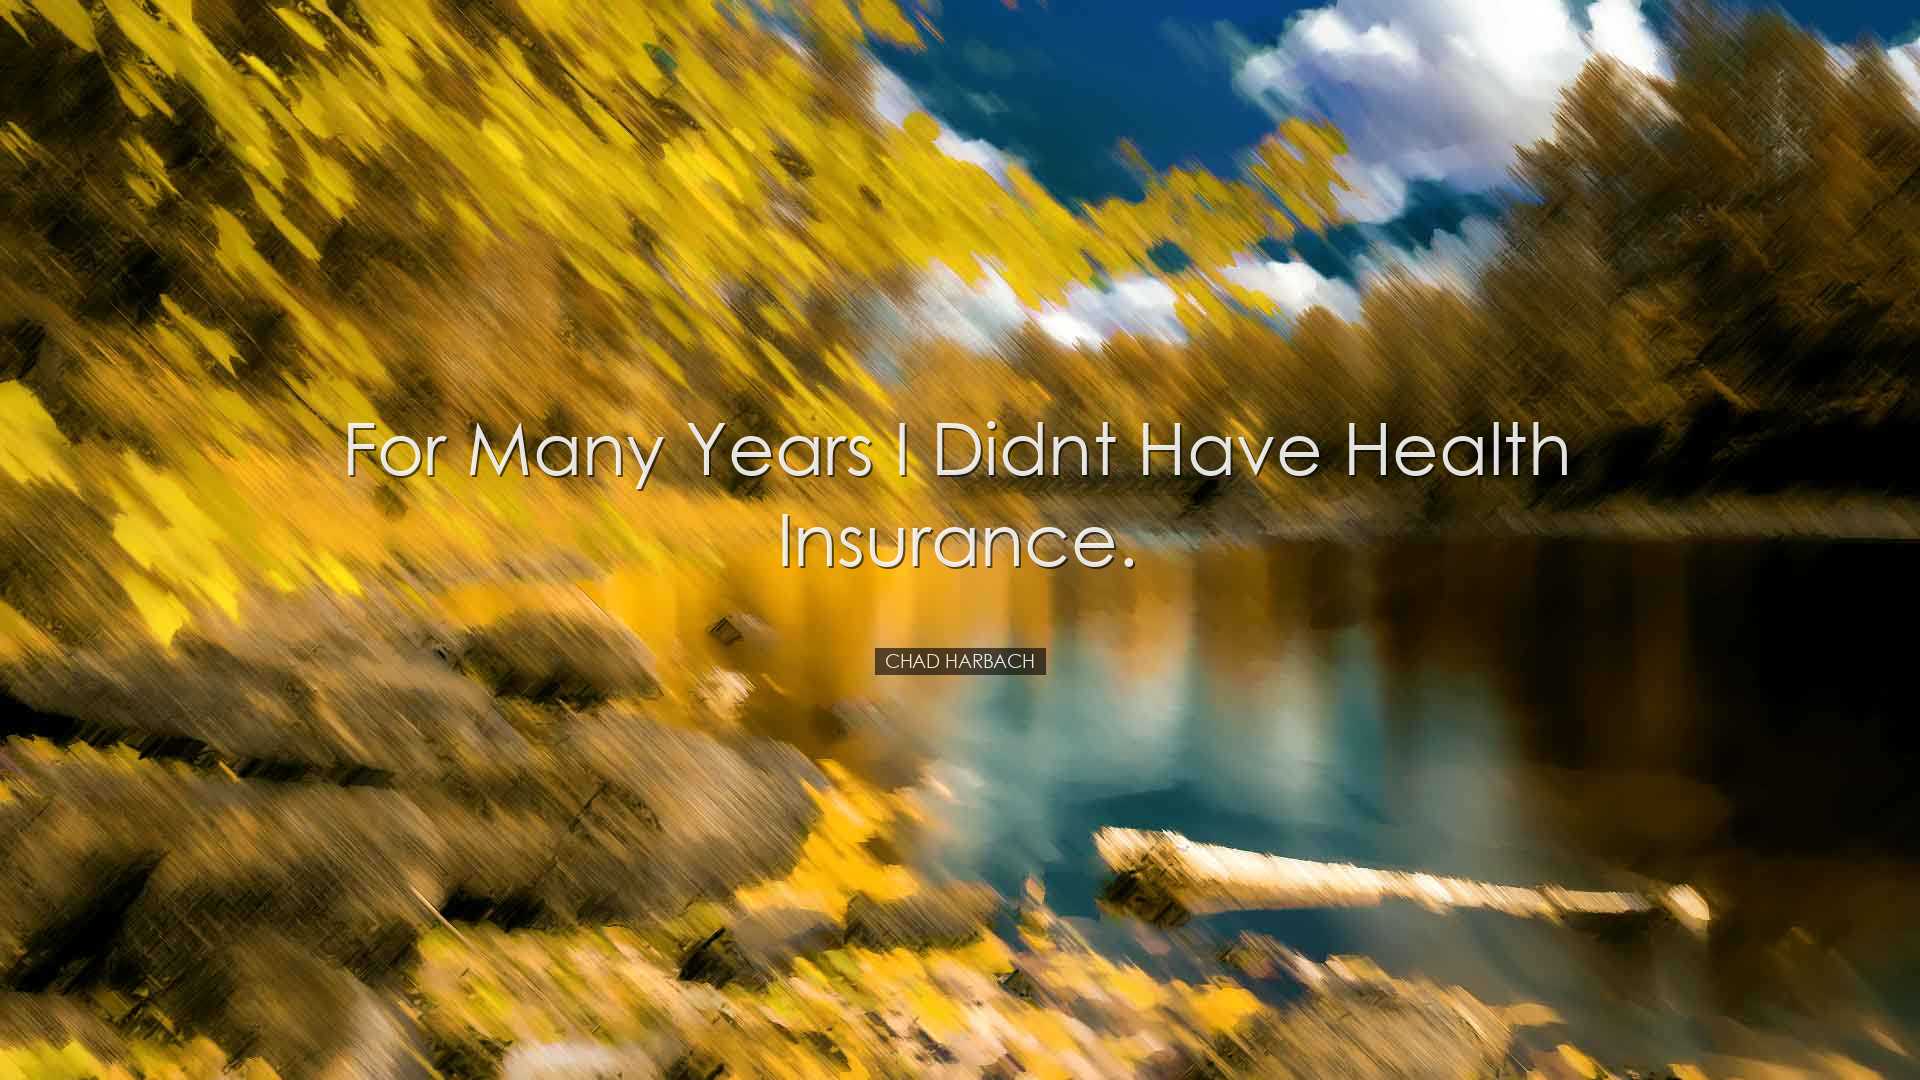 For many years I didnt have health insurance. - Chad Harbach